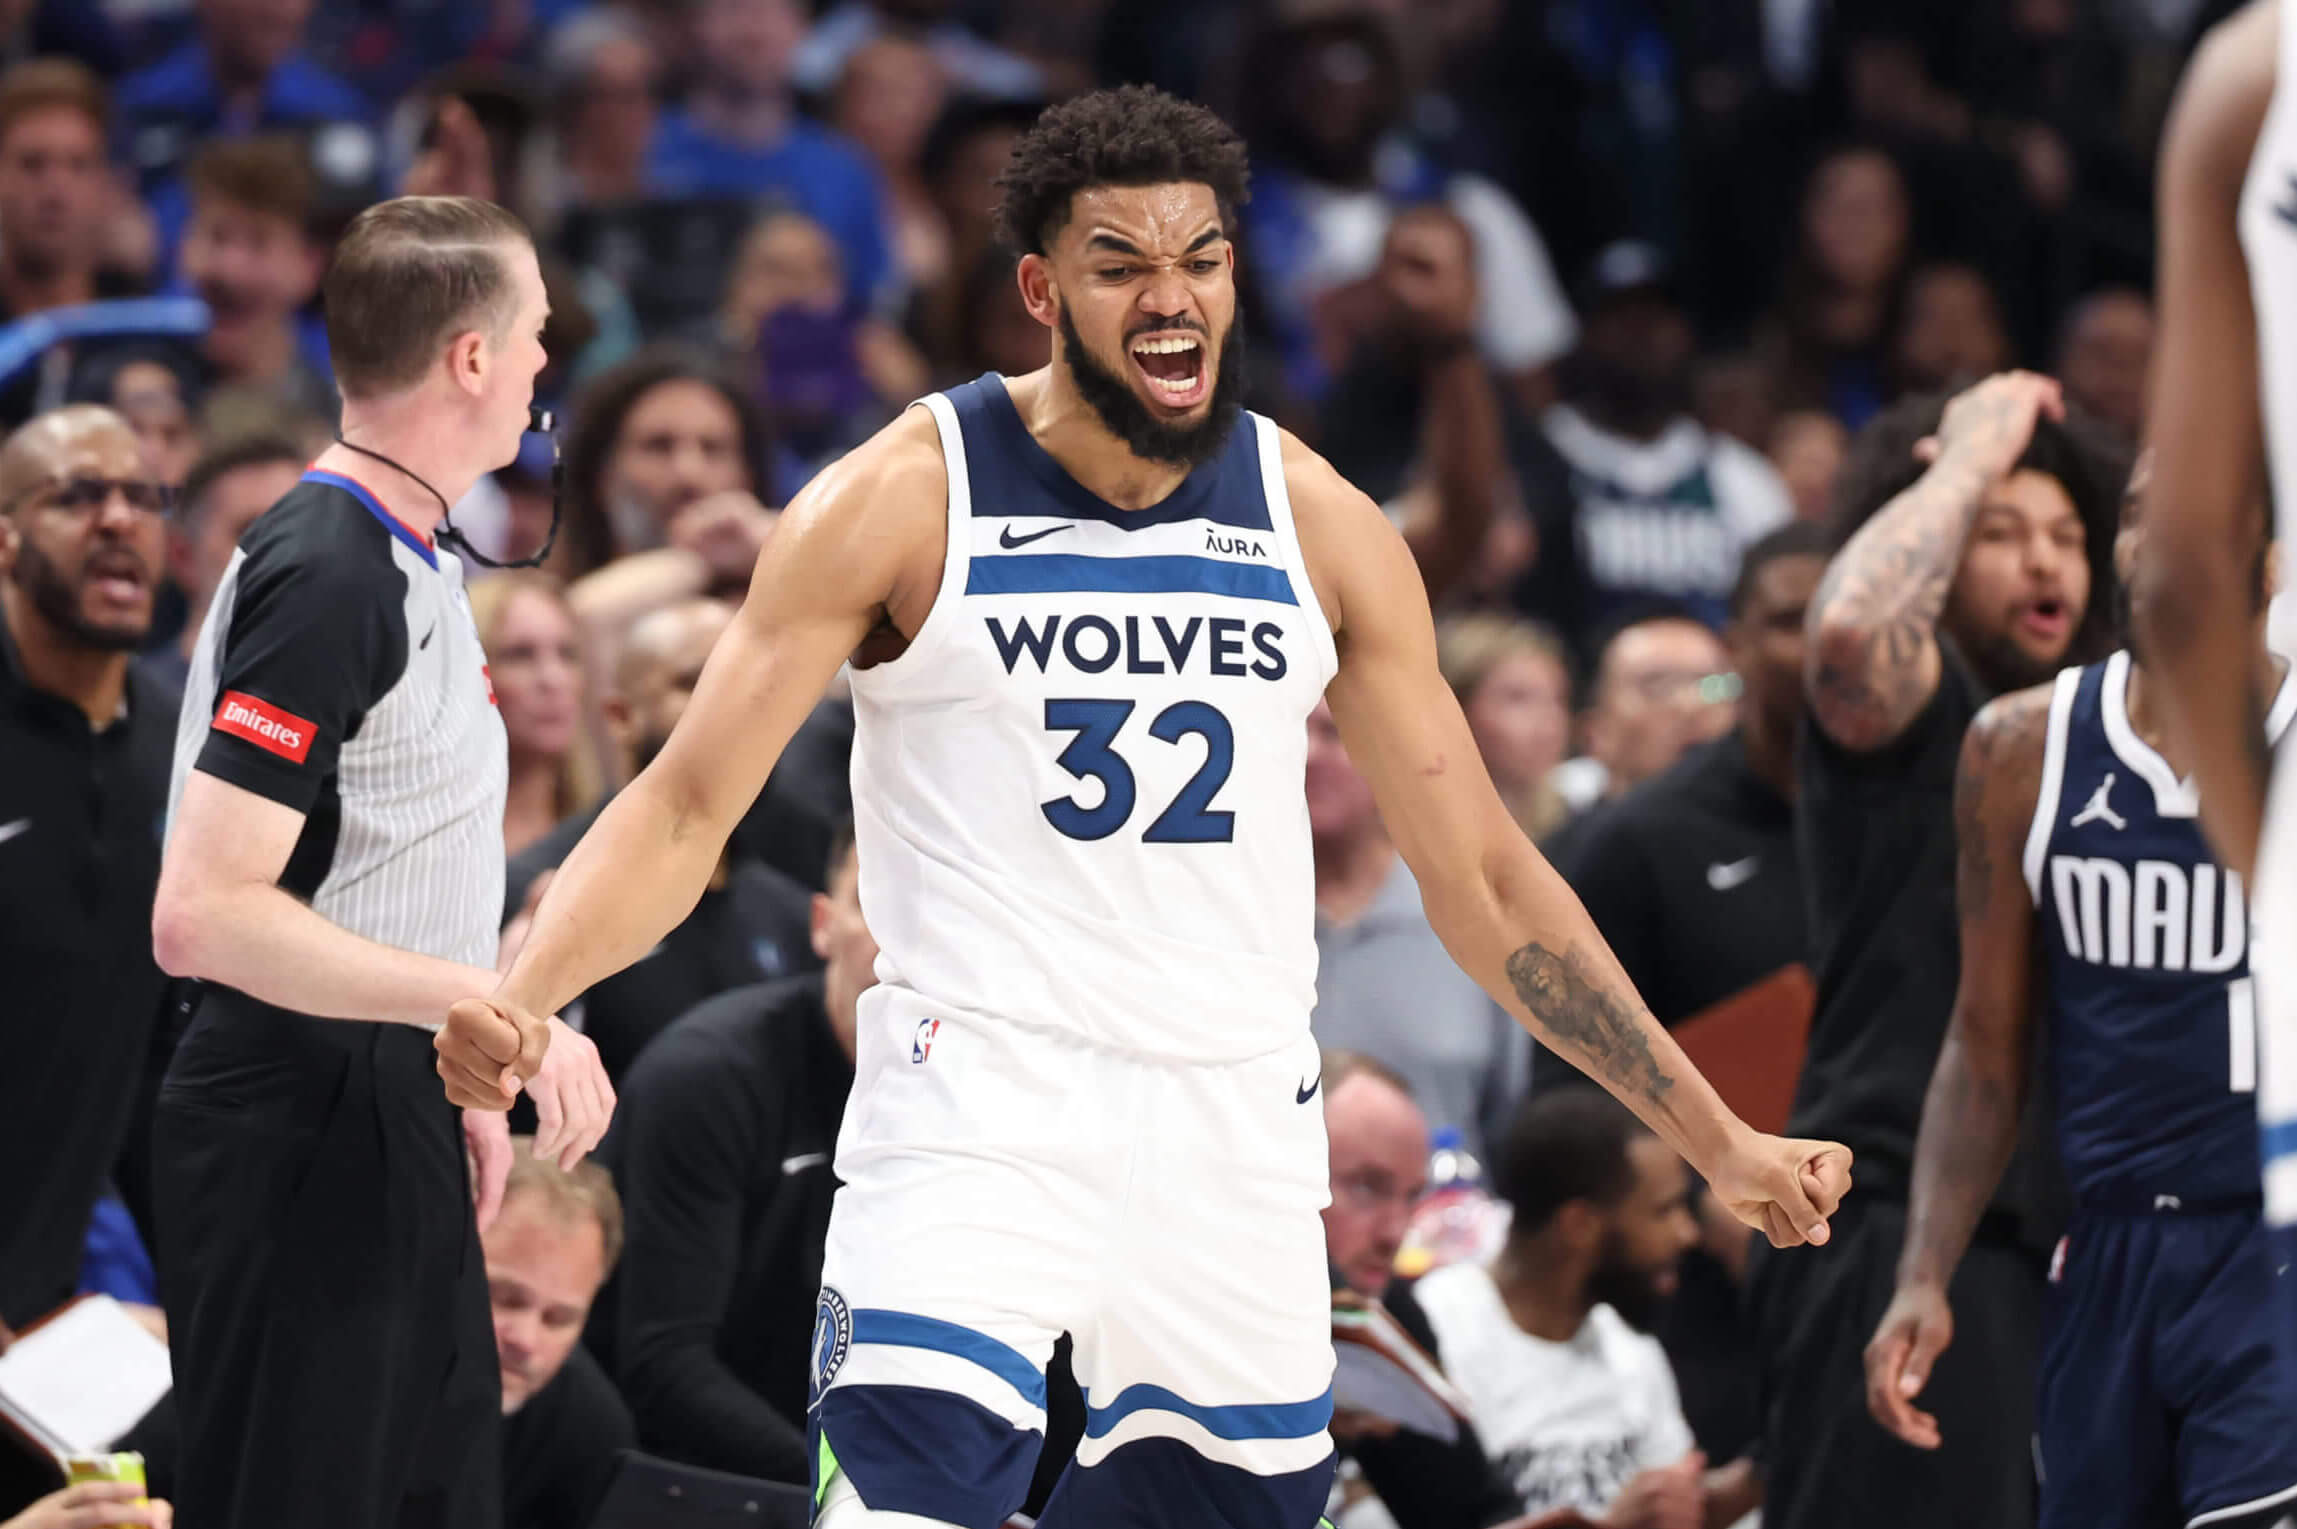 Karl-Anthony Towns 'came through big time' to help Timberwolves stave off elimination